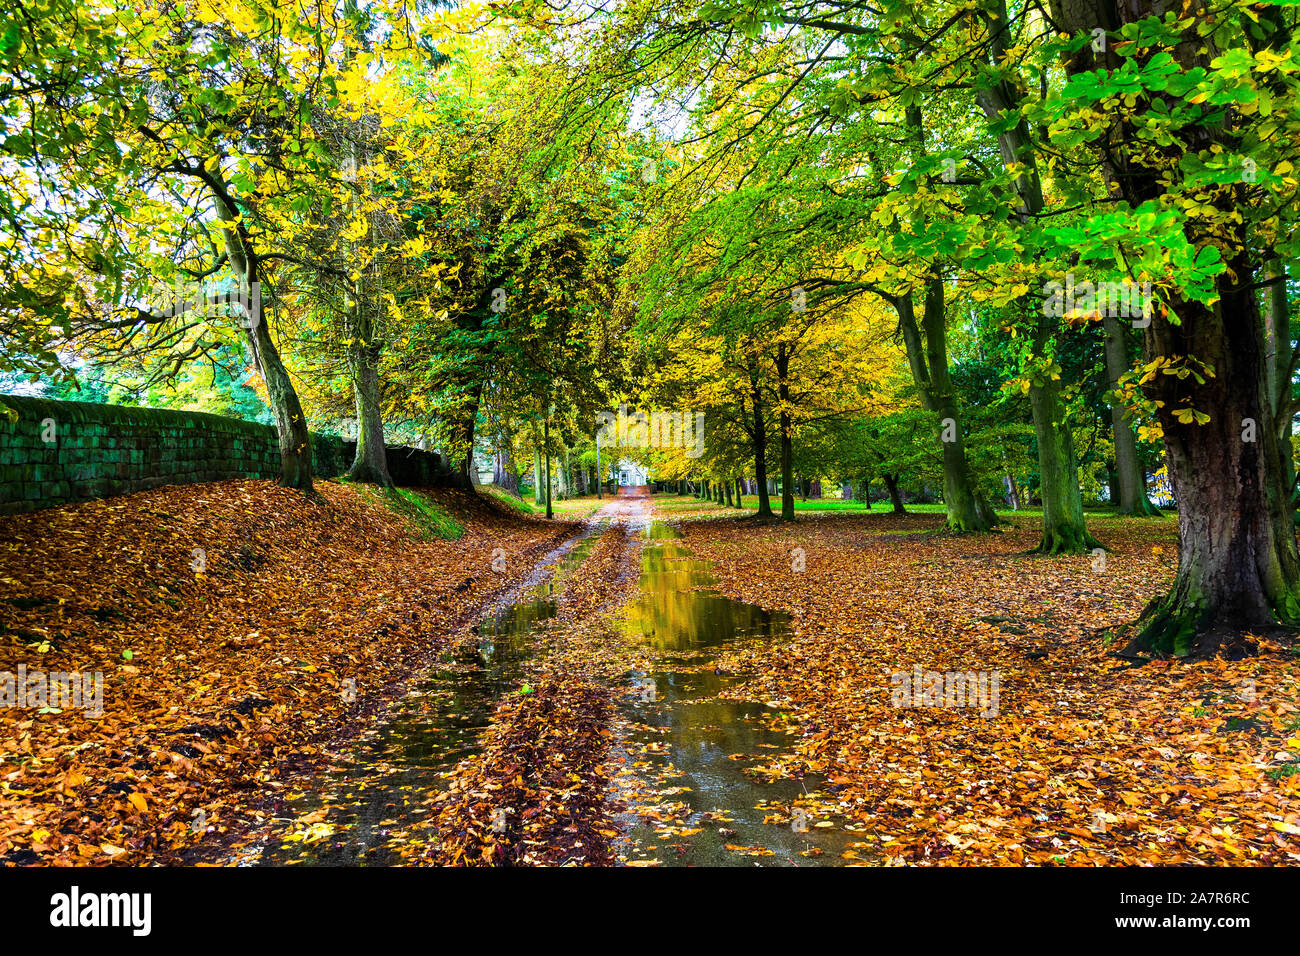 Autumn scene with wet road with puddles and a carpet of leaves Stock Photo